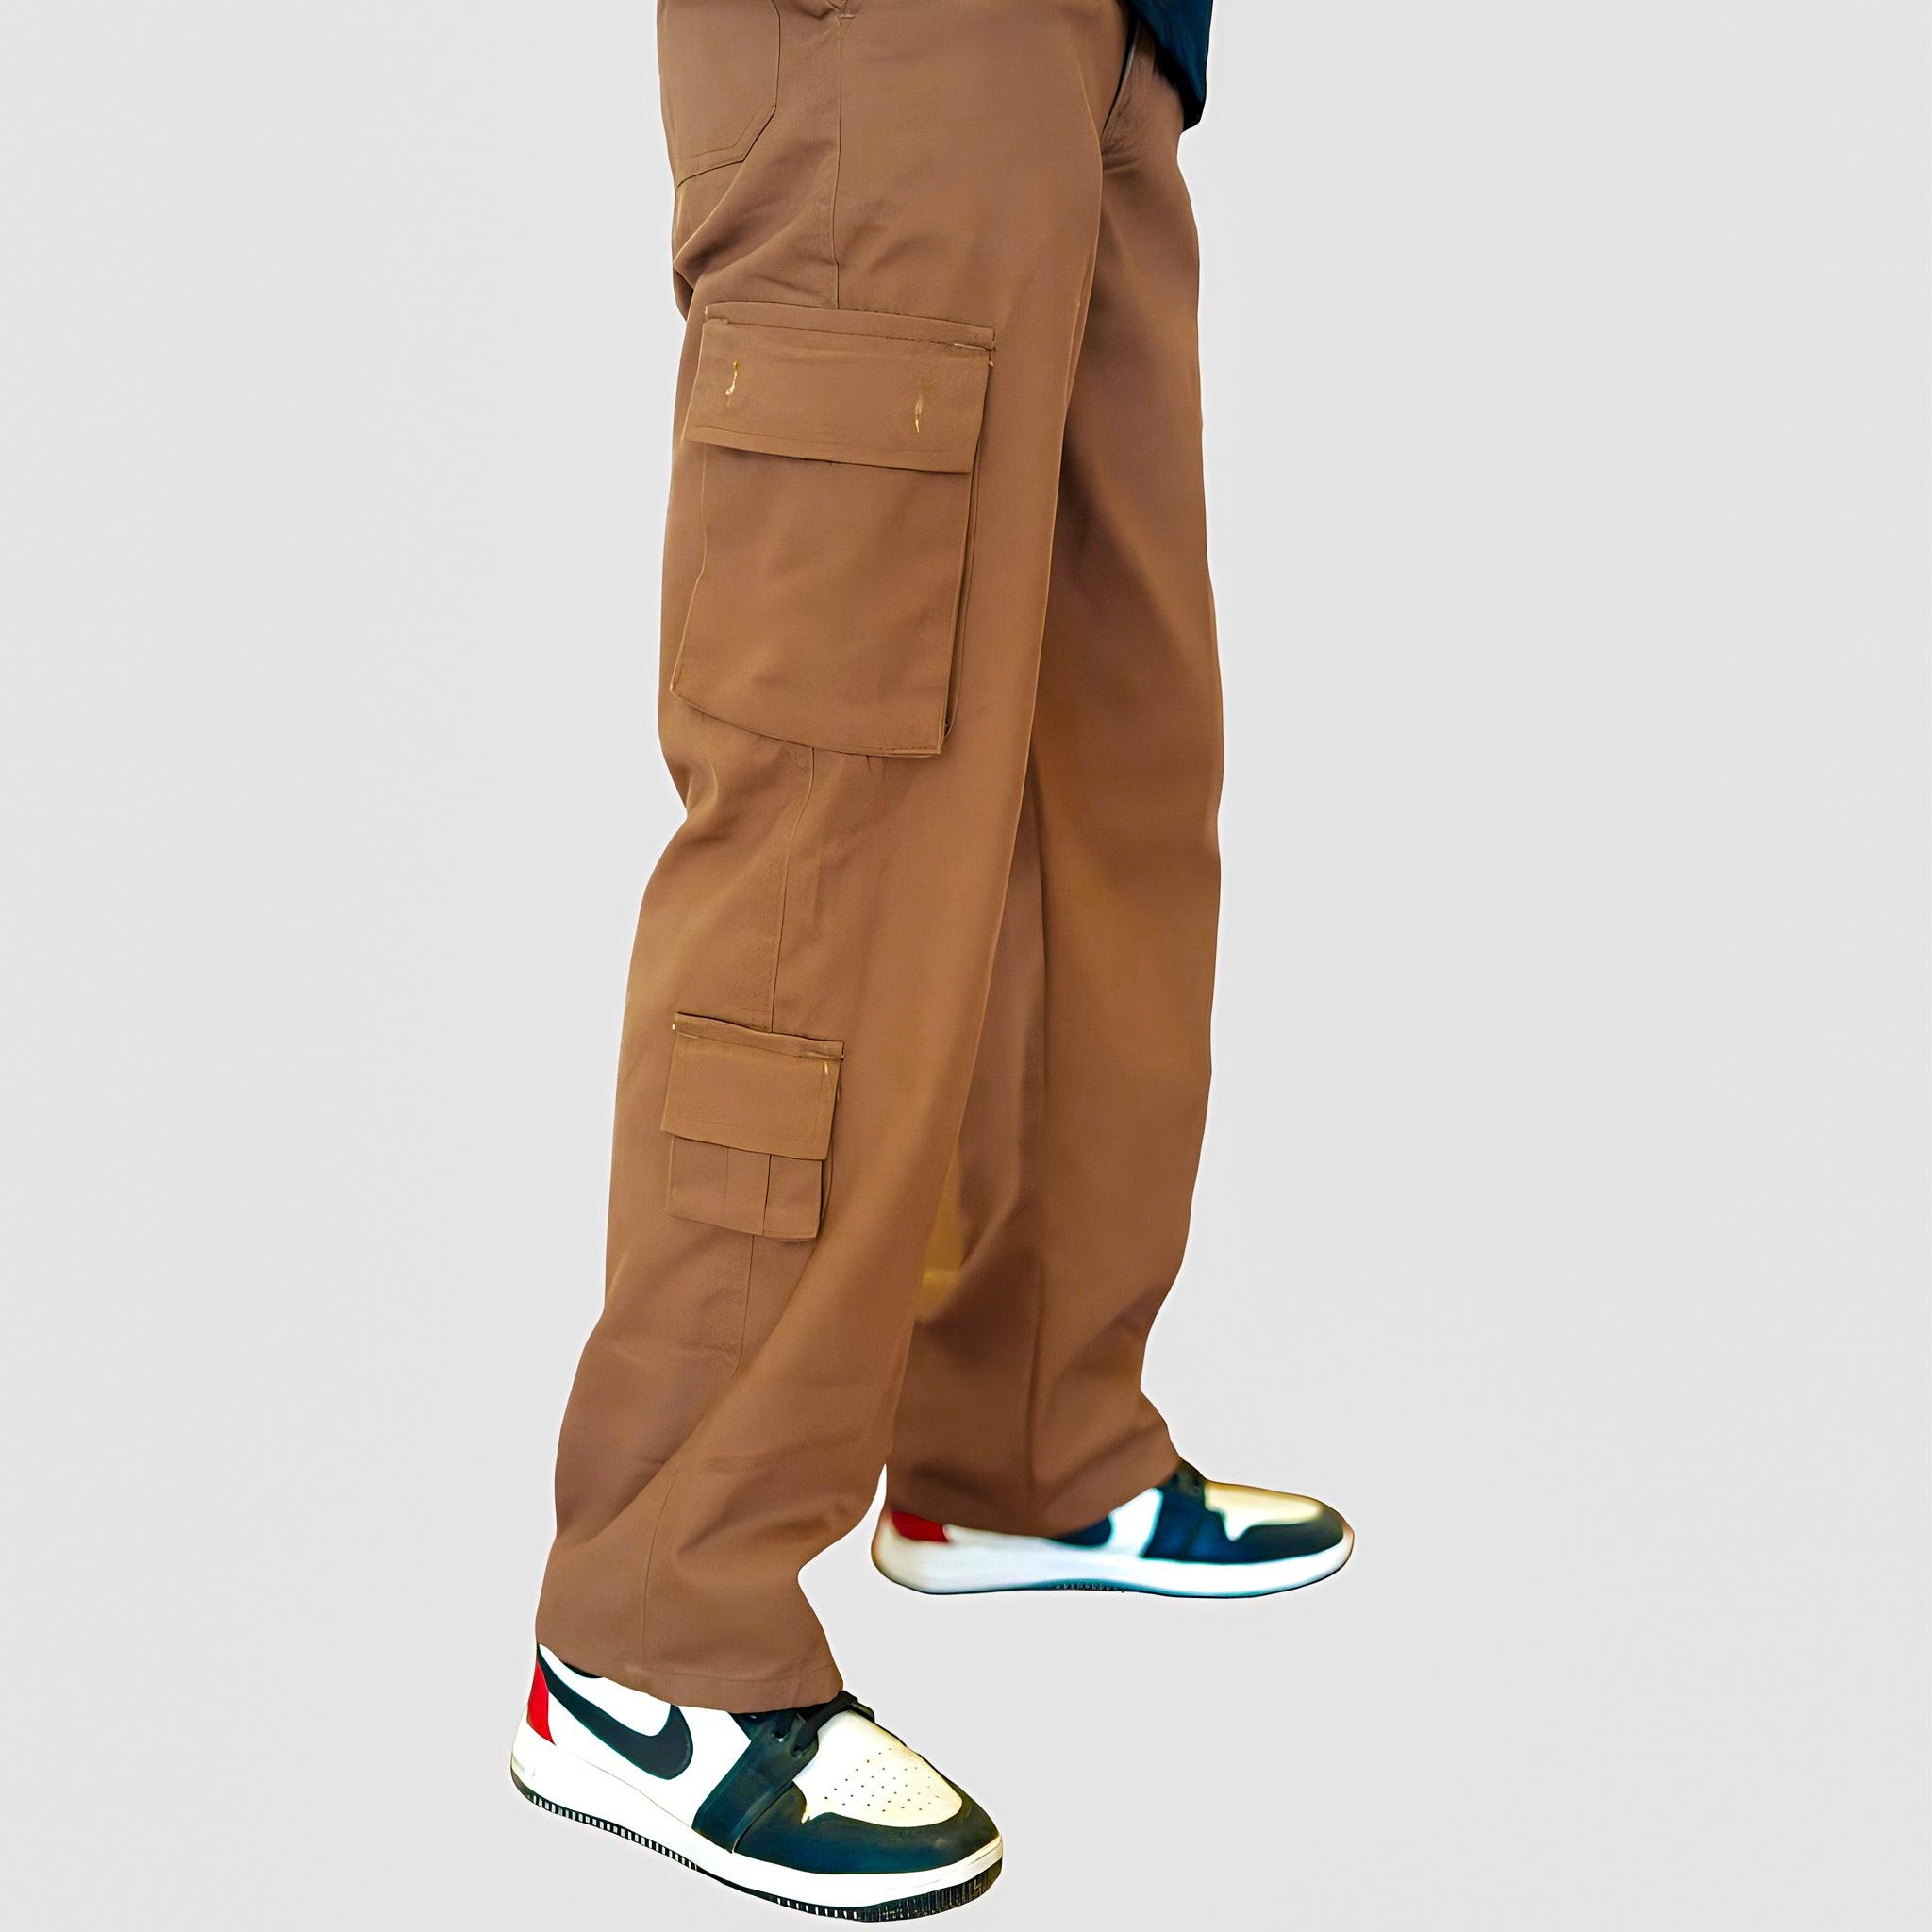 URBAN INDY Genuine Cotton Twill Men's 8 Pocket Cargo Pants - Stylish and  Utilitarian Cargos for Men, Trousers Loose Fit - Price History